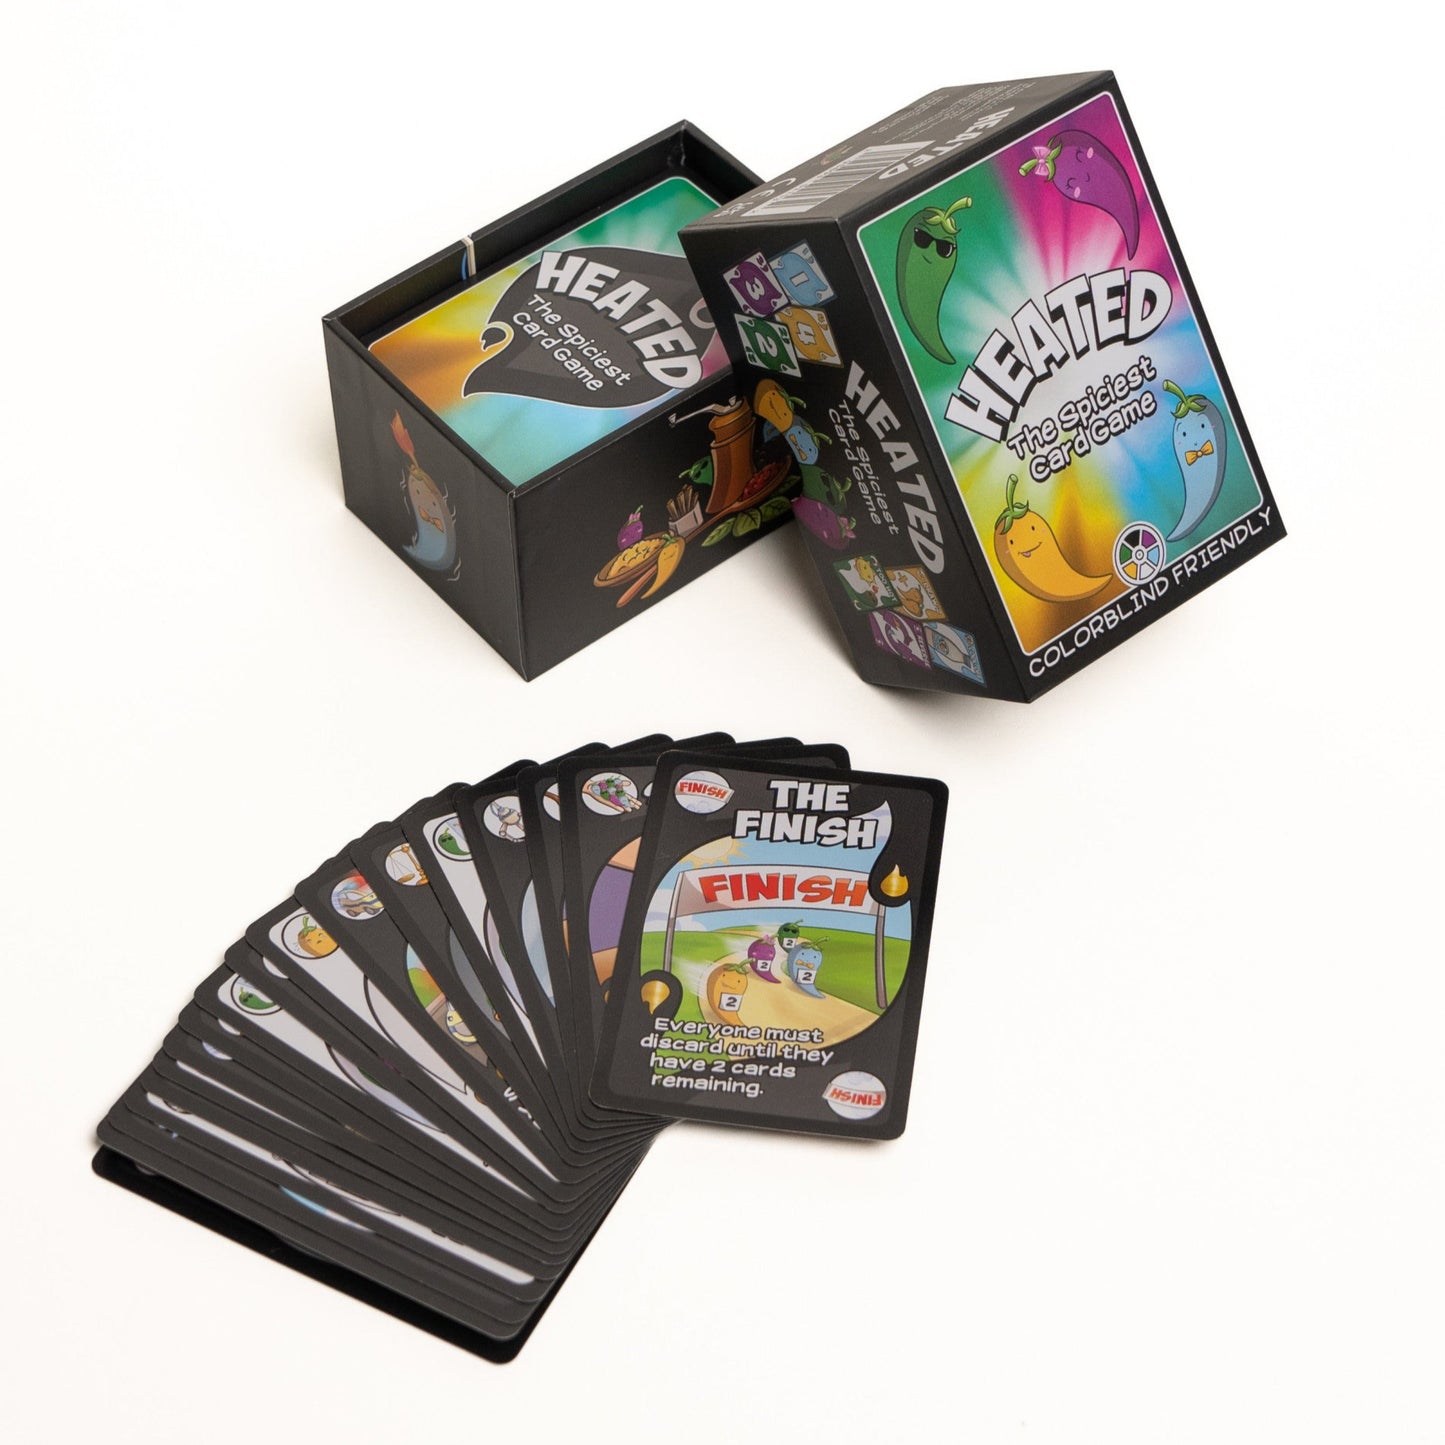 HEATED Card Game - Base Game + Expansion